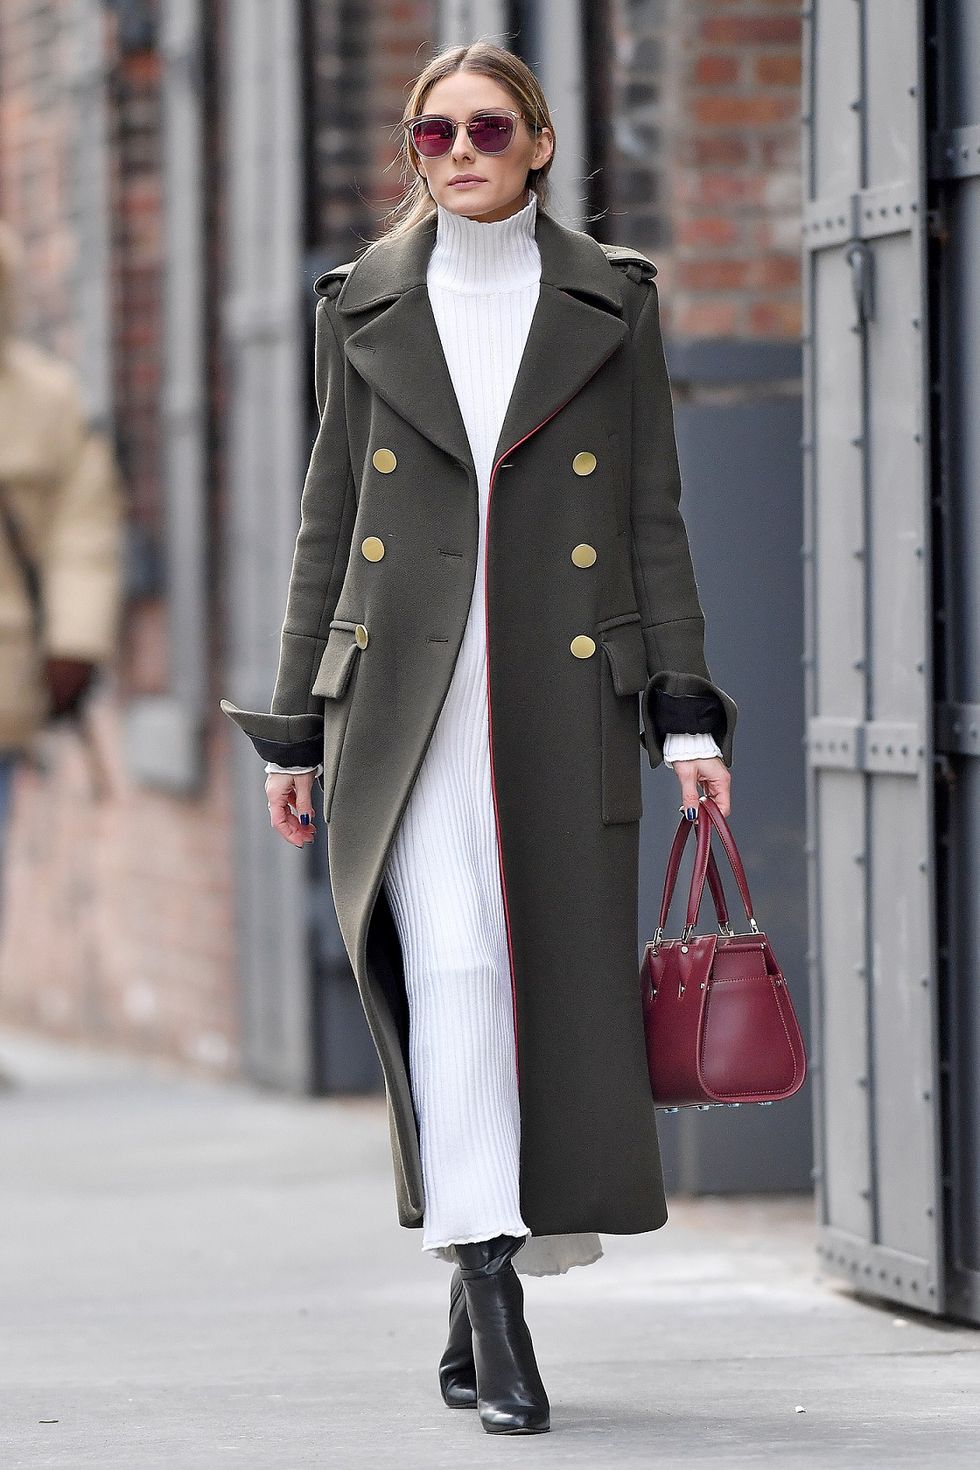 Clothing, Coat, Street fashion, Fashion, Overcoat, Trench coat, Outerwear, Fashion model, Ankle, Footwear, 